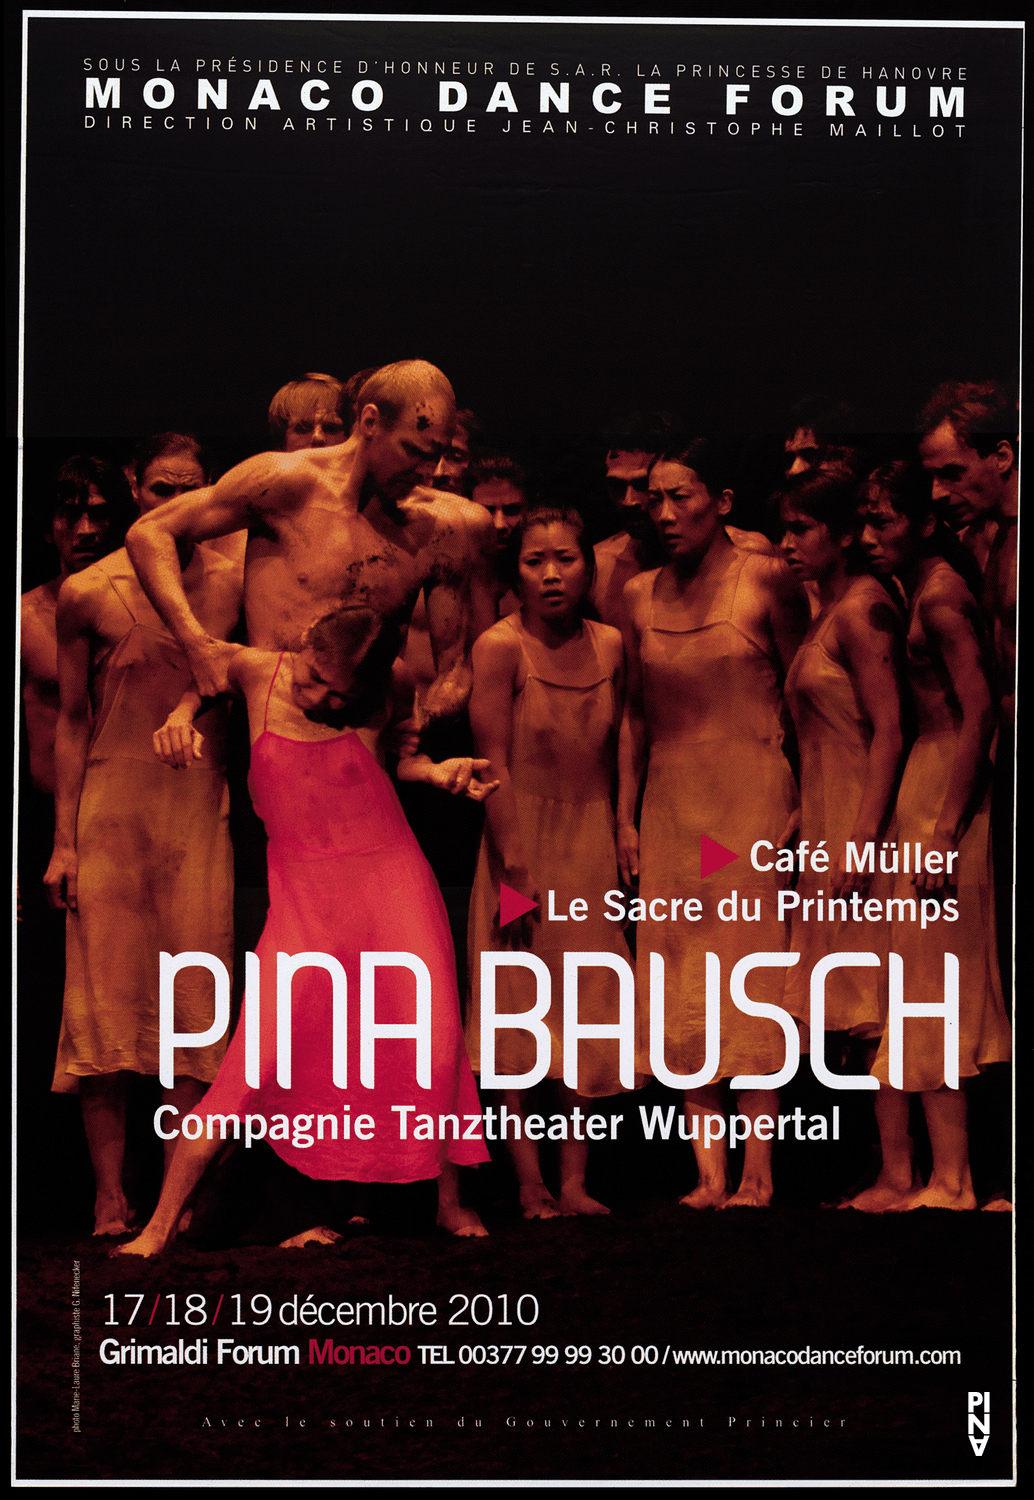 Poster for “Café Müller” and “The Rite of Spring” by Pina Bausch in Monaco, 12/17/2010 – 12/19/2010